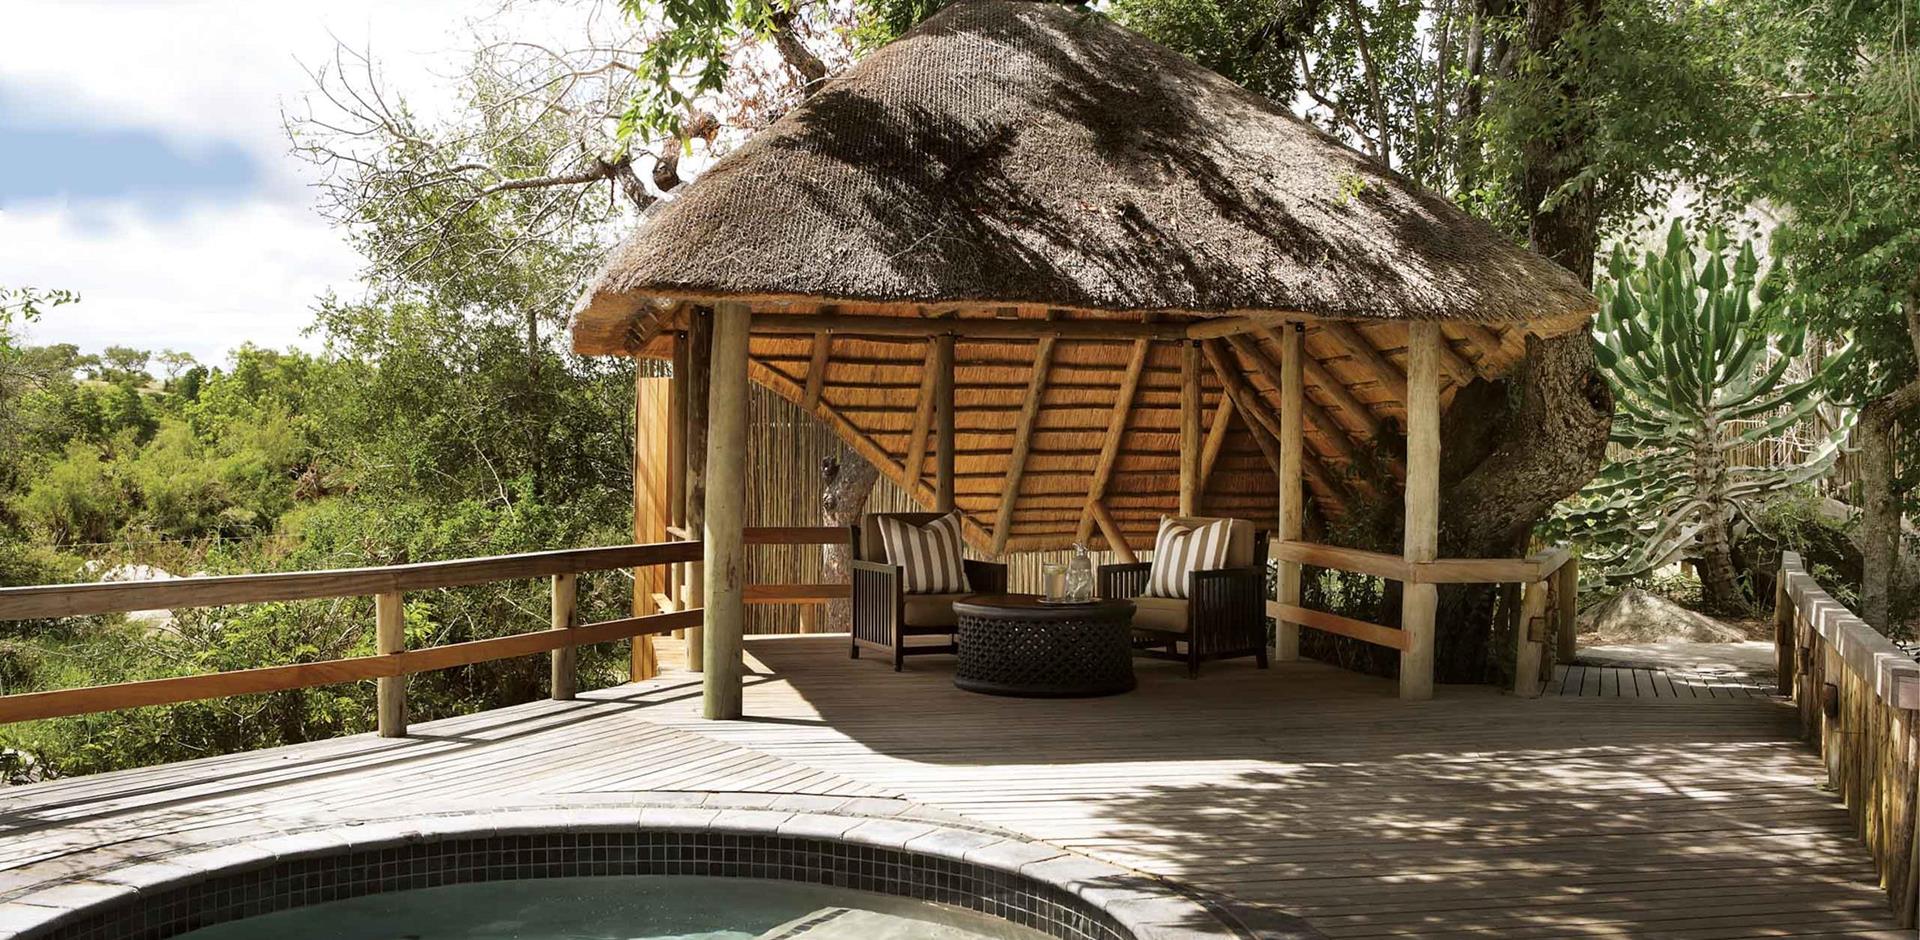 Poolside, Londolozi Founders, South Africa, A&K